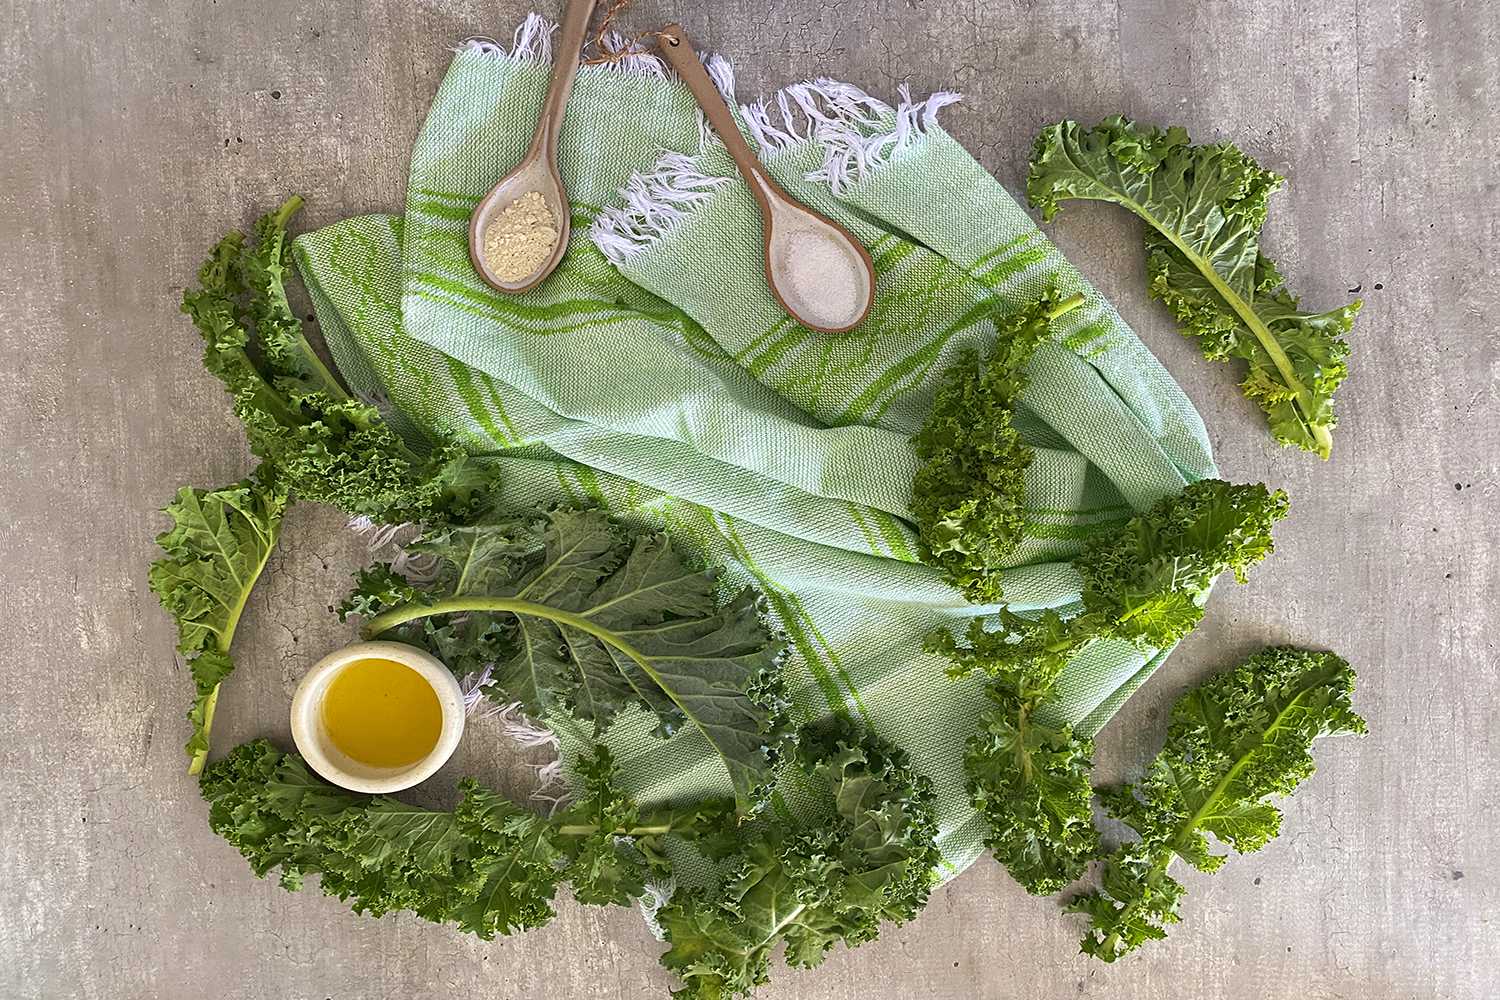 ingredients needed to make Instant Pot Kale Chips